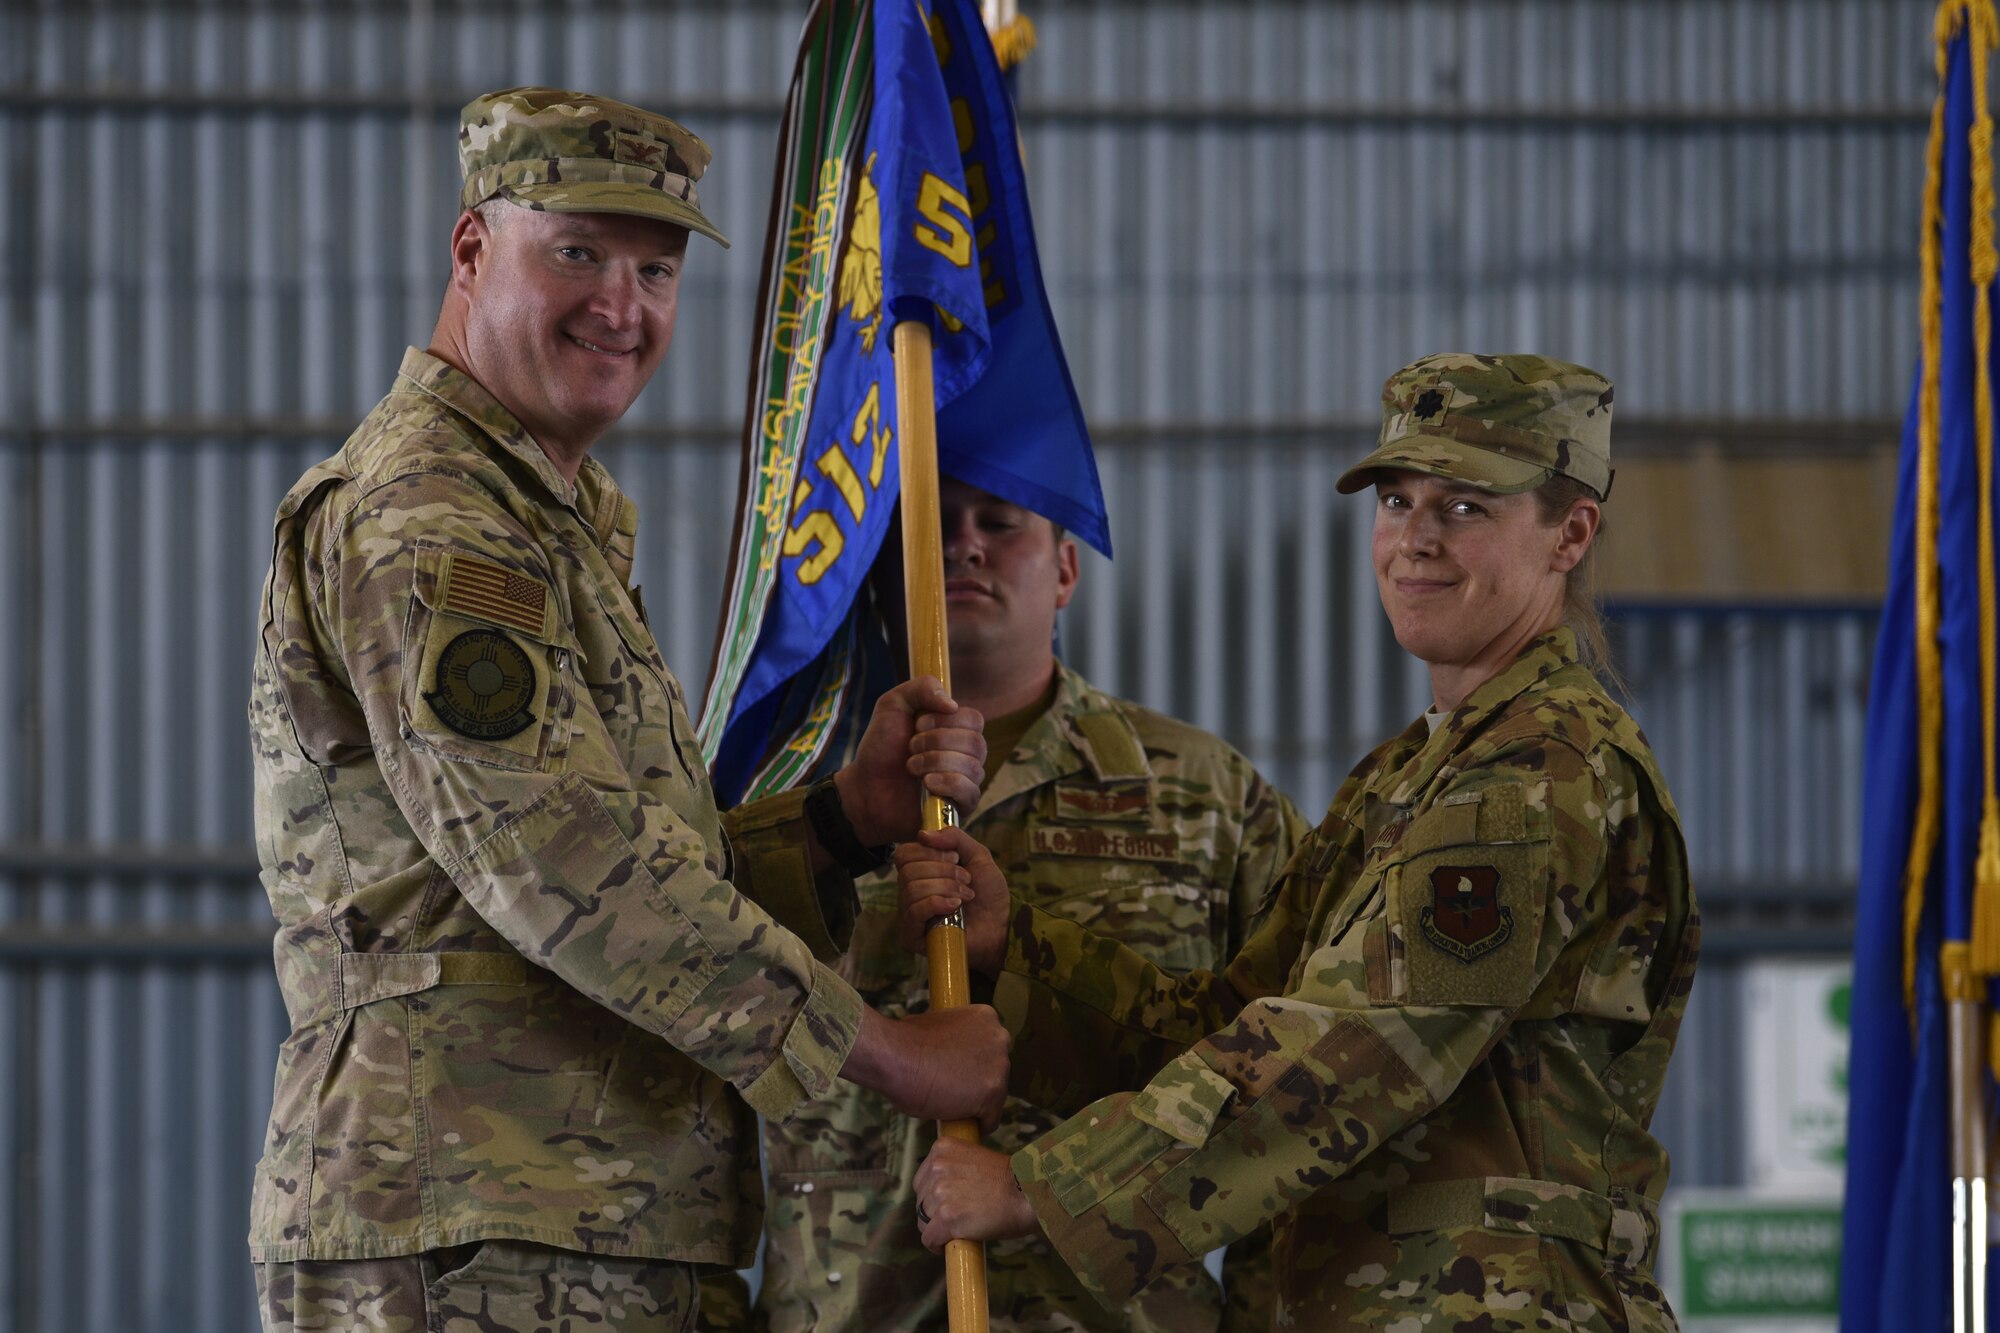 U.S. Air Force Lt. Col. Dana Bochte (right), 512th Rescue Squadron commander, receives command of the 512 RQS from U.S. Air Force Col. Richard Carrell, 58th Operations Group commander during the 512th RQS change of command ceremony at Kirtland Air Force Base, N.M., May 23, 2019. The mission of the 512 RQS is to prepare mission-ready aircrew for personnel recovery, nuclear enterprise security and support, and distinguished visitor airlift at operational units across the Air Force. (U.S. Air Force photo by Airman 1st Class Austin J. Prisbrey)